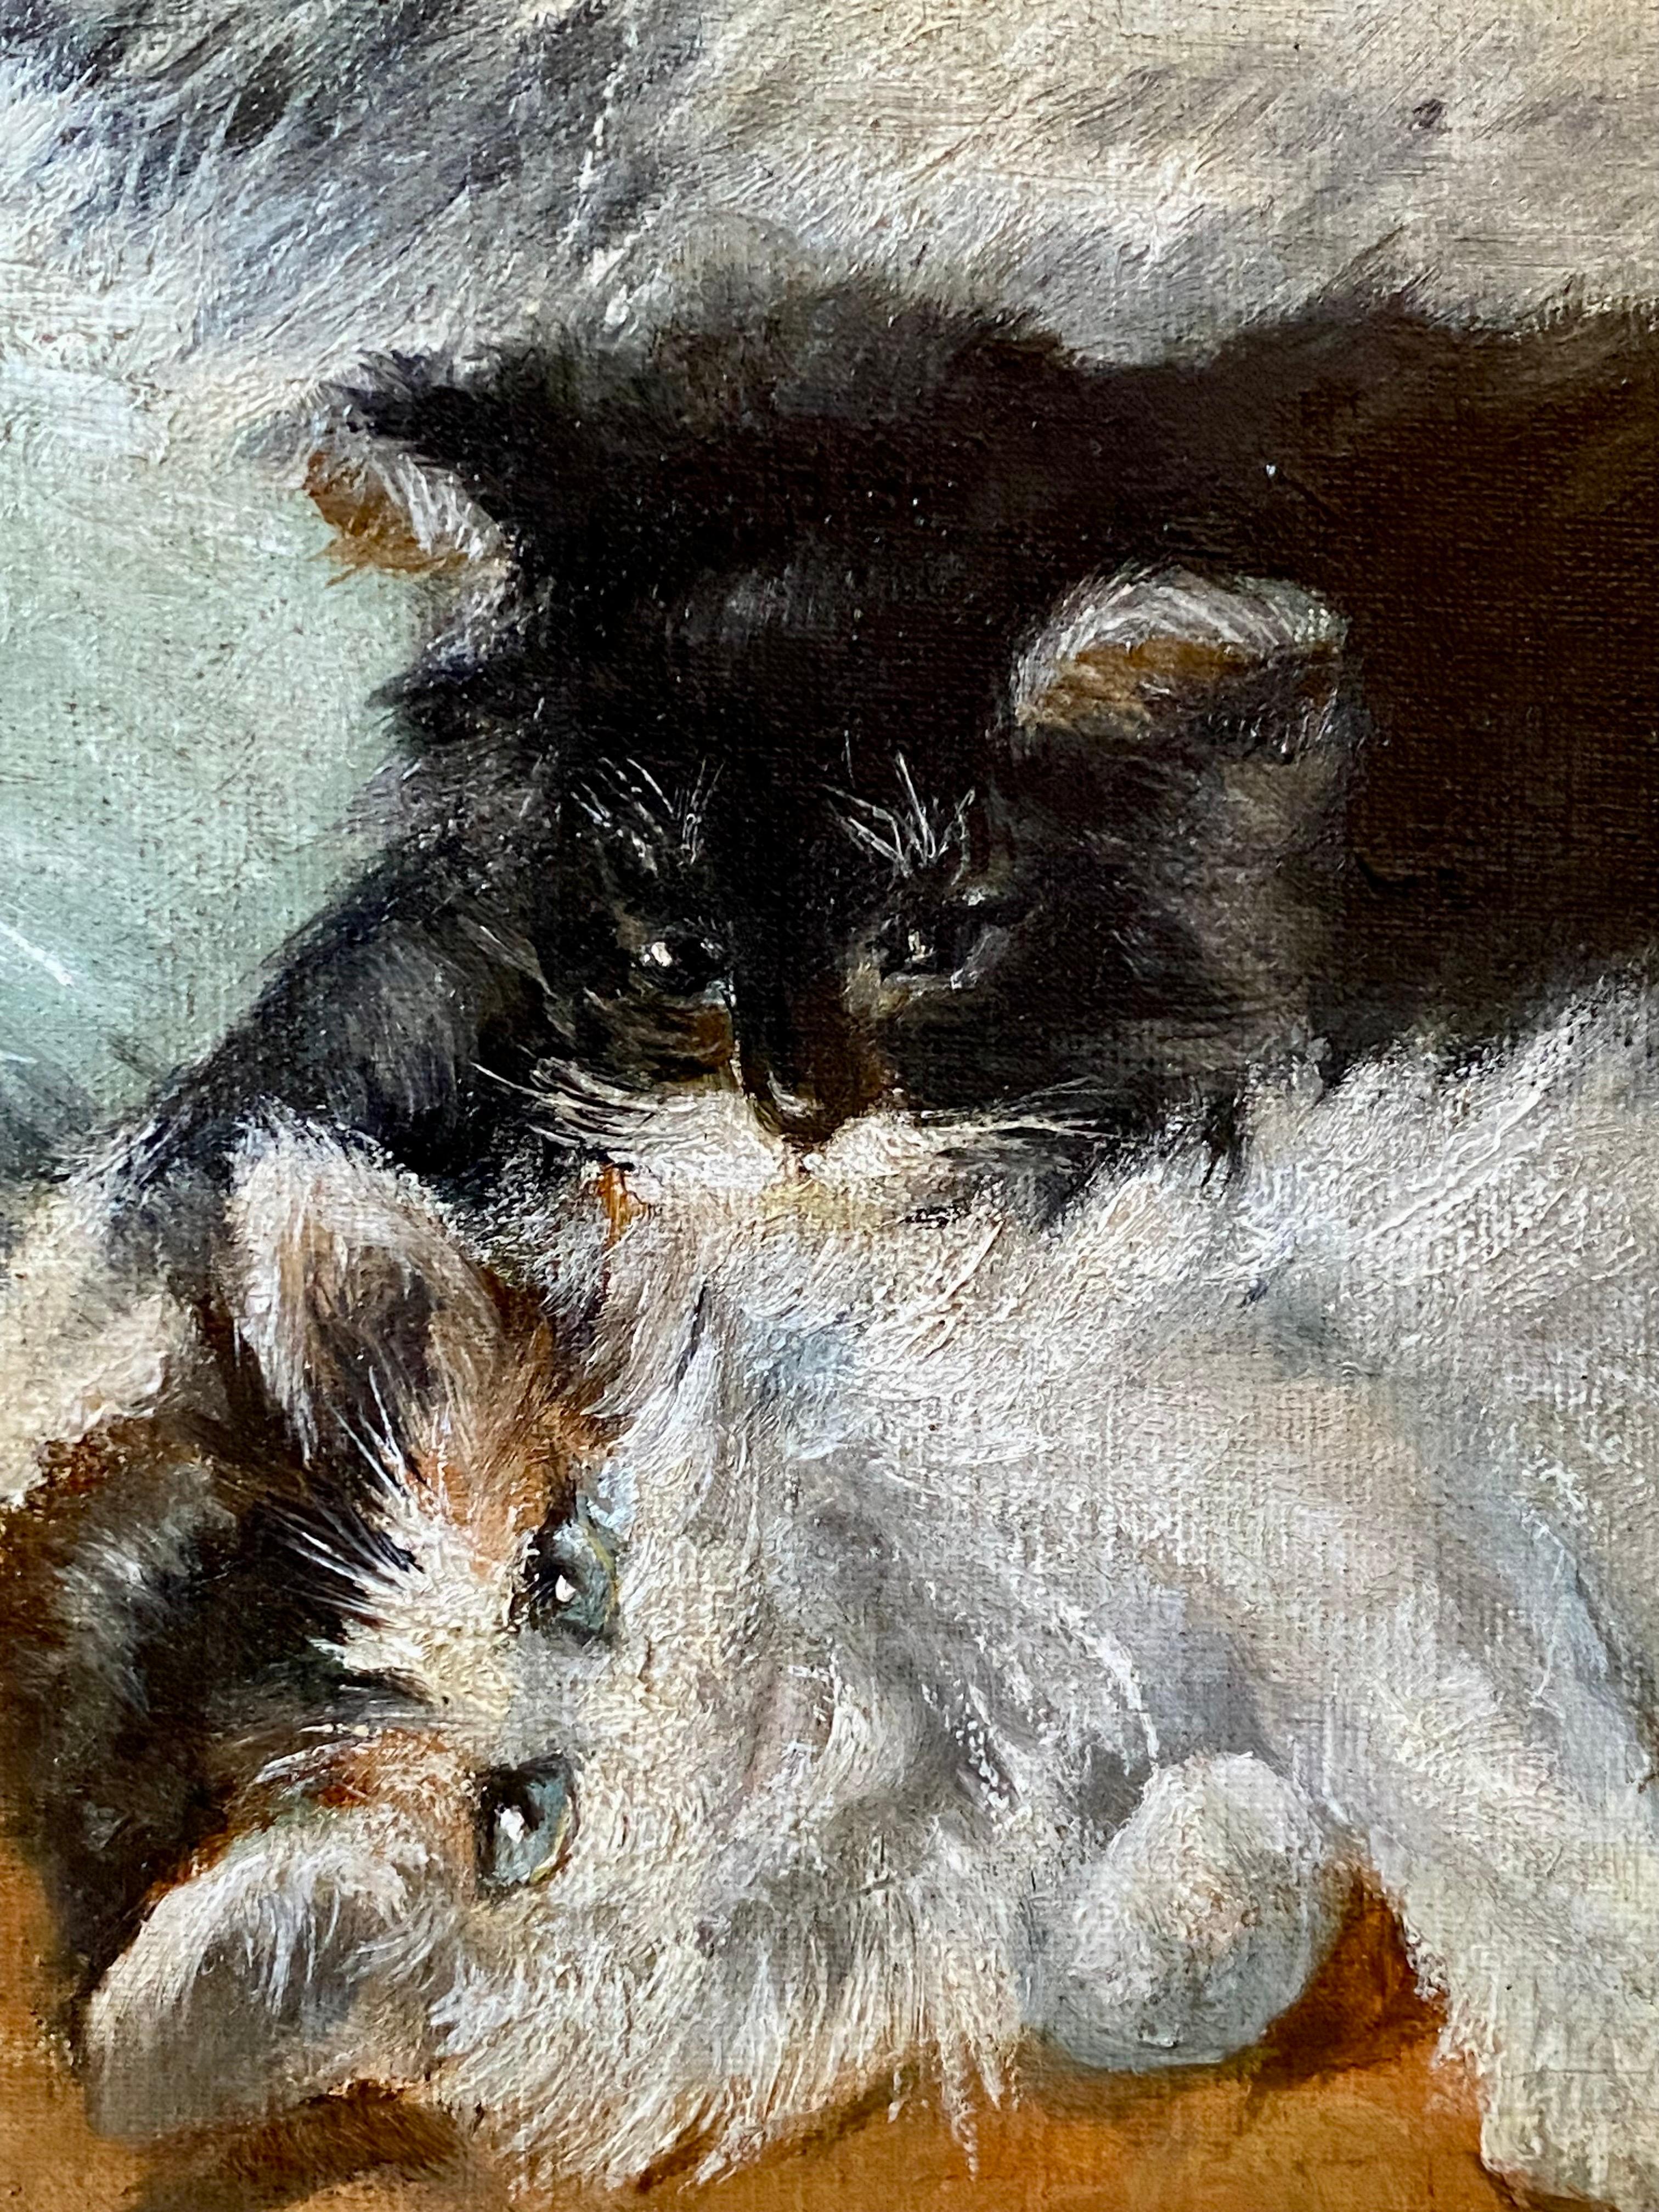 Adorable oil painting depicting a mother cat playing with her kittens painted in 1912 by a follower of Henriette Ronner-Knip

Henriëtte Ronner-Knip (31 May 1821 – 2 March 1909) was a famous Dutch-Belgian artist in the Romantic style who particularly